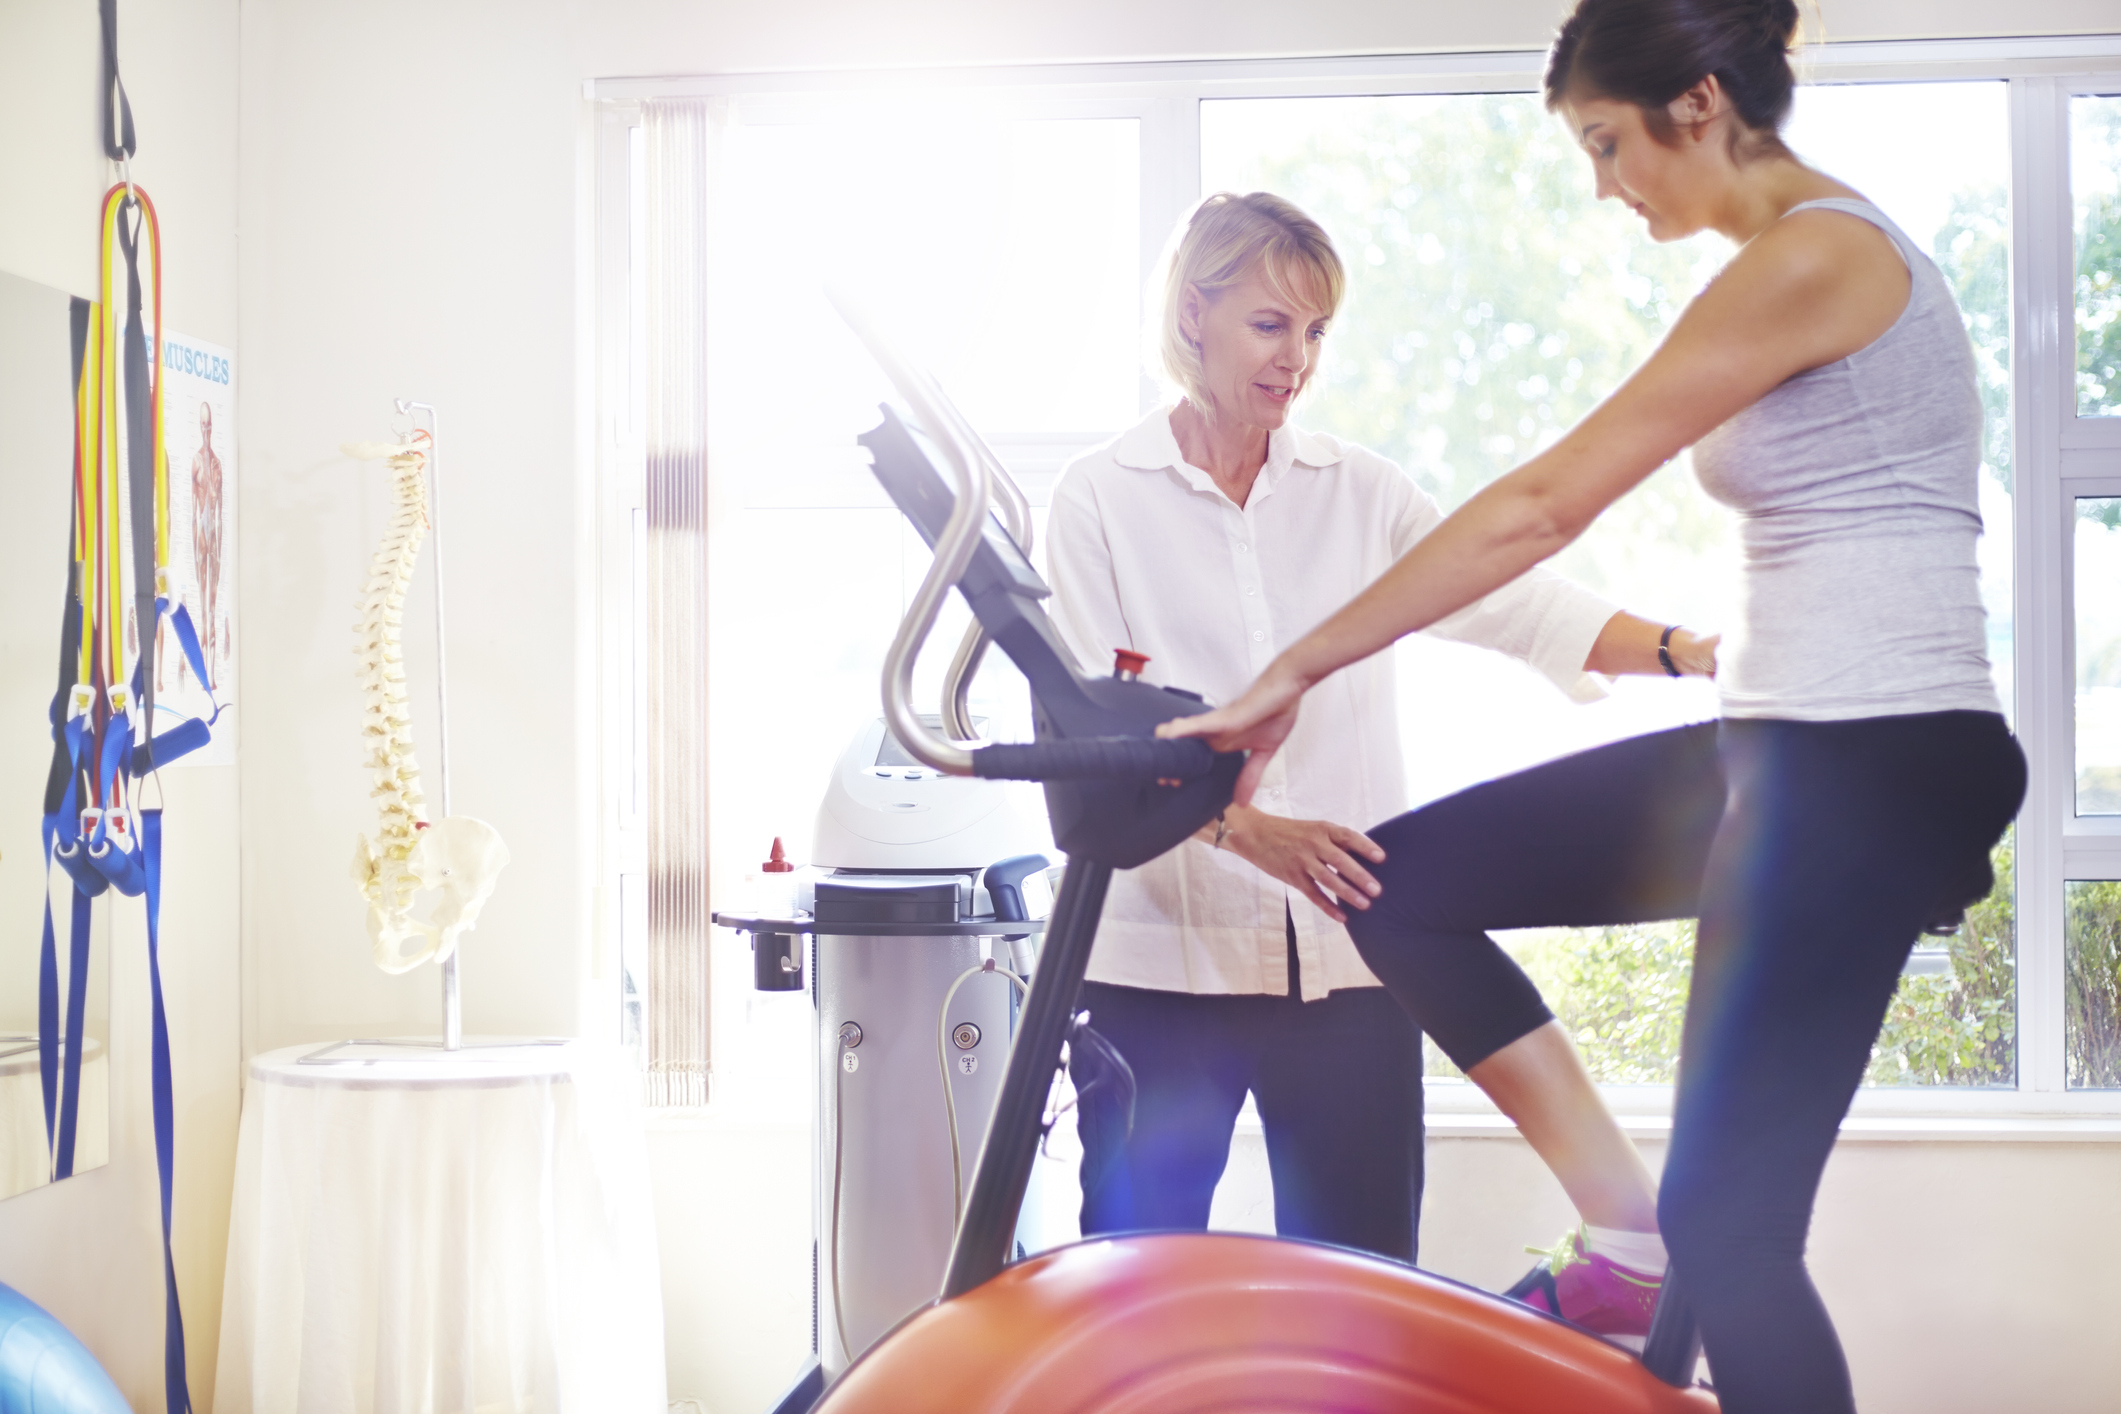 Physical therapist guiding patient on stationary bike